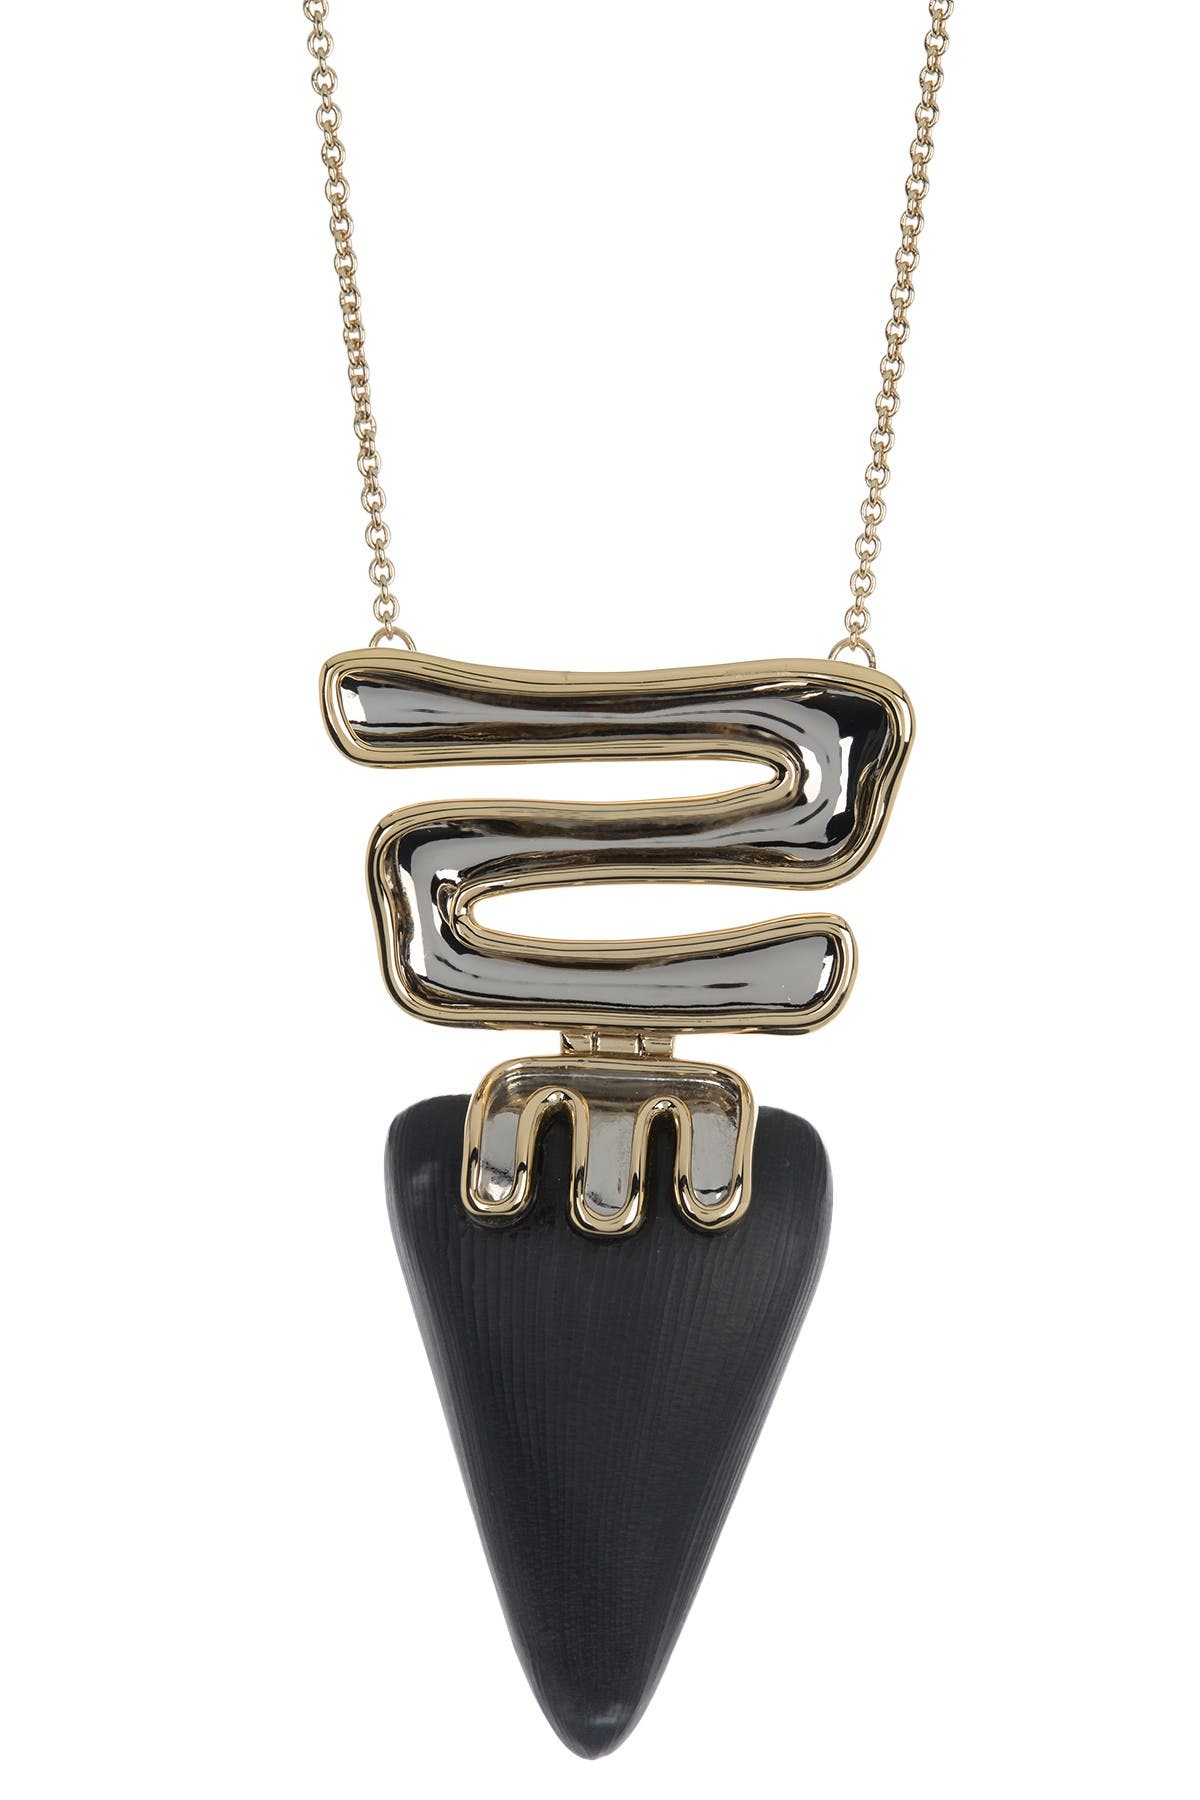 Alexis Bittar Two-tone Sculptural Hinged Pendant Necklace In Black